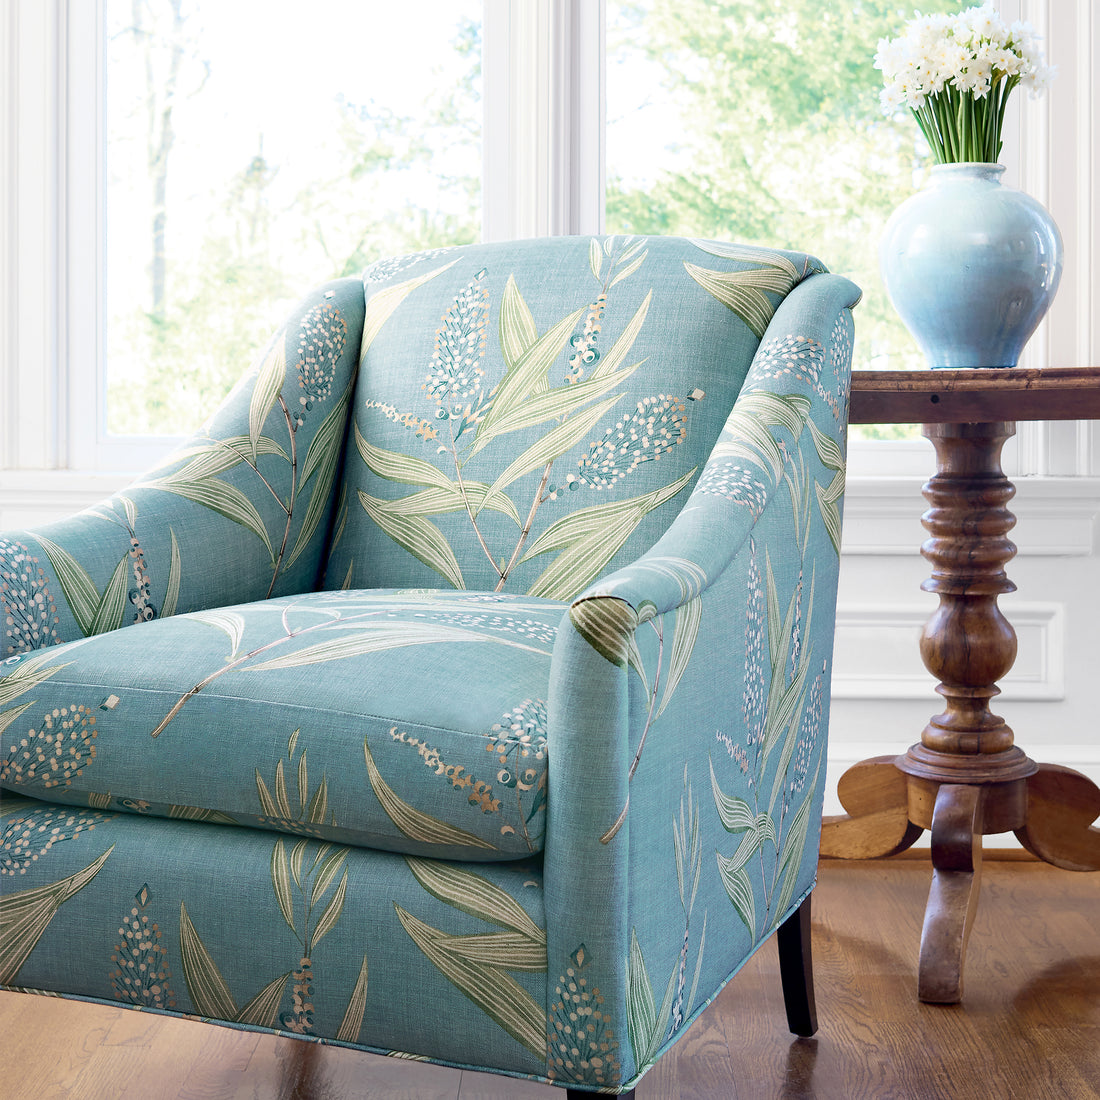 Stanwick Chair in Winter Bud printed fabric in Teal - pattern number AF23136 - by Anna French in the Willow Tree collection